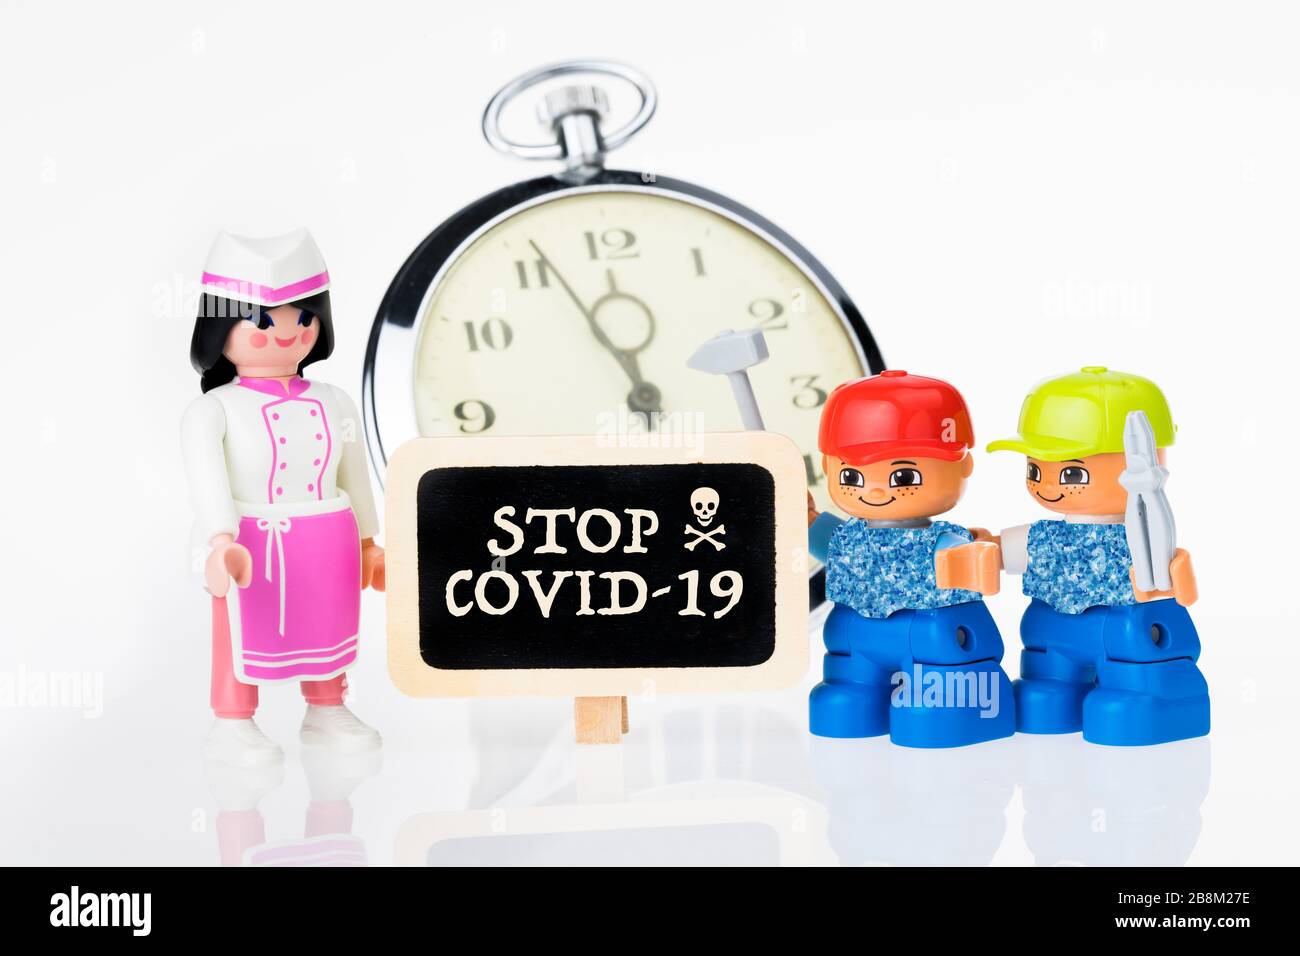 Unemployment risk and part time working due to COVID-19 Coronavirus crisis. Stock Photo